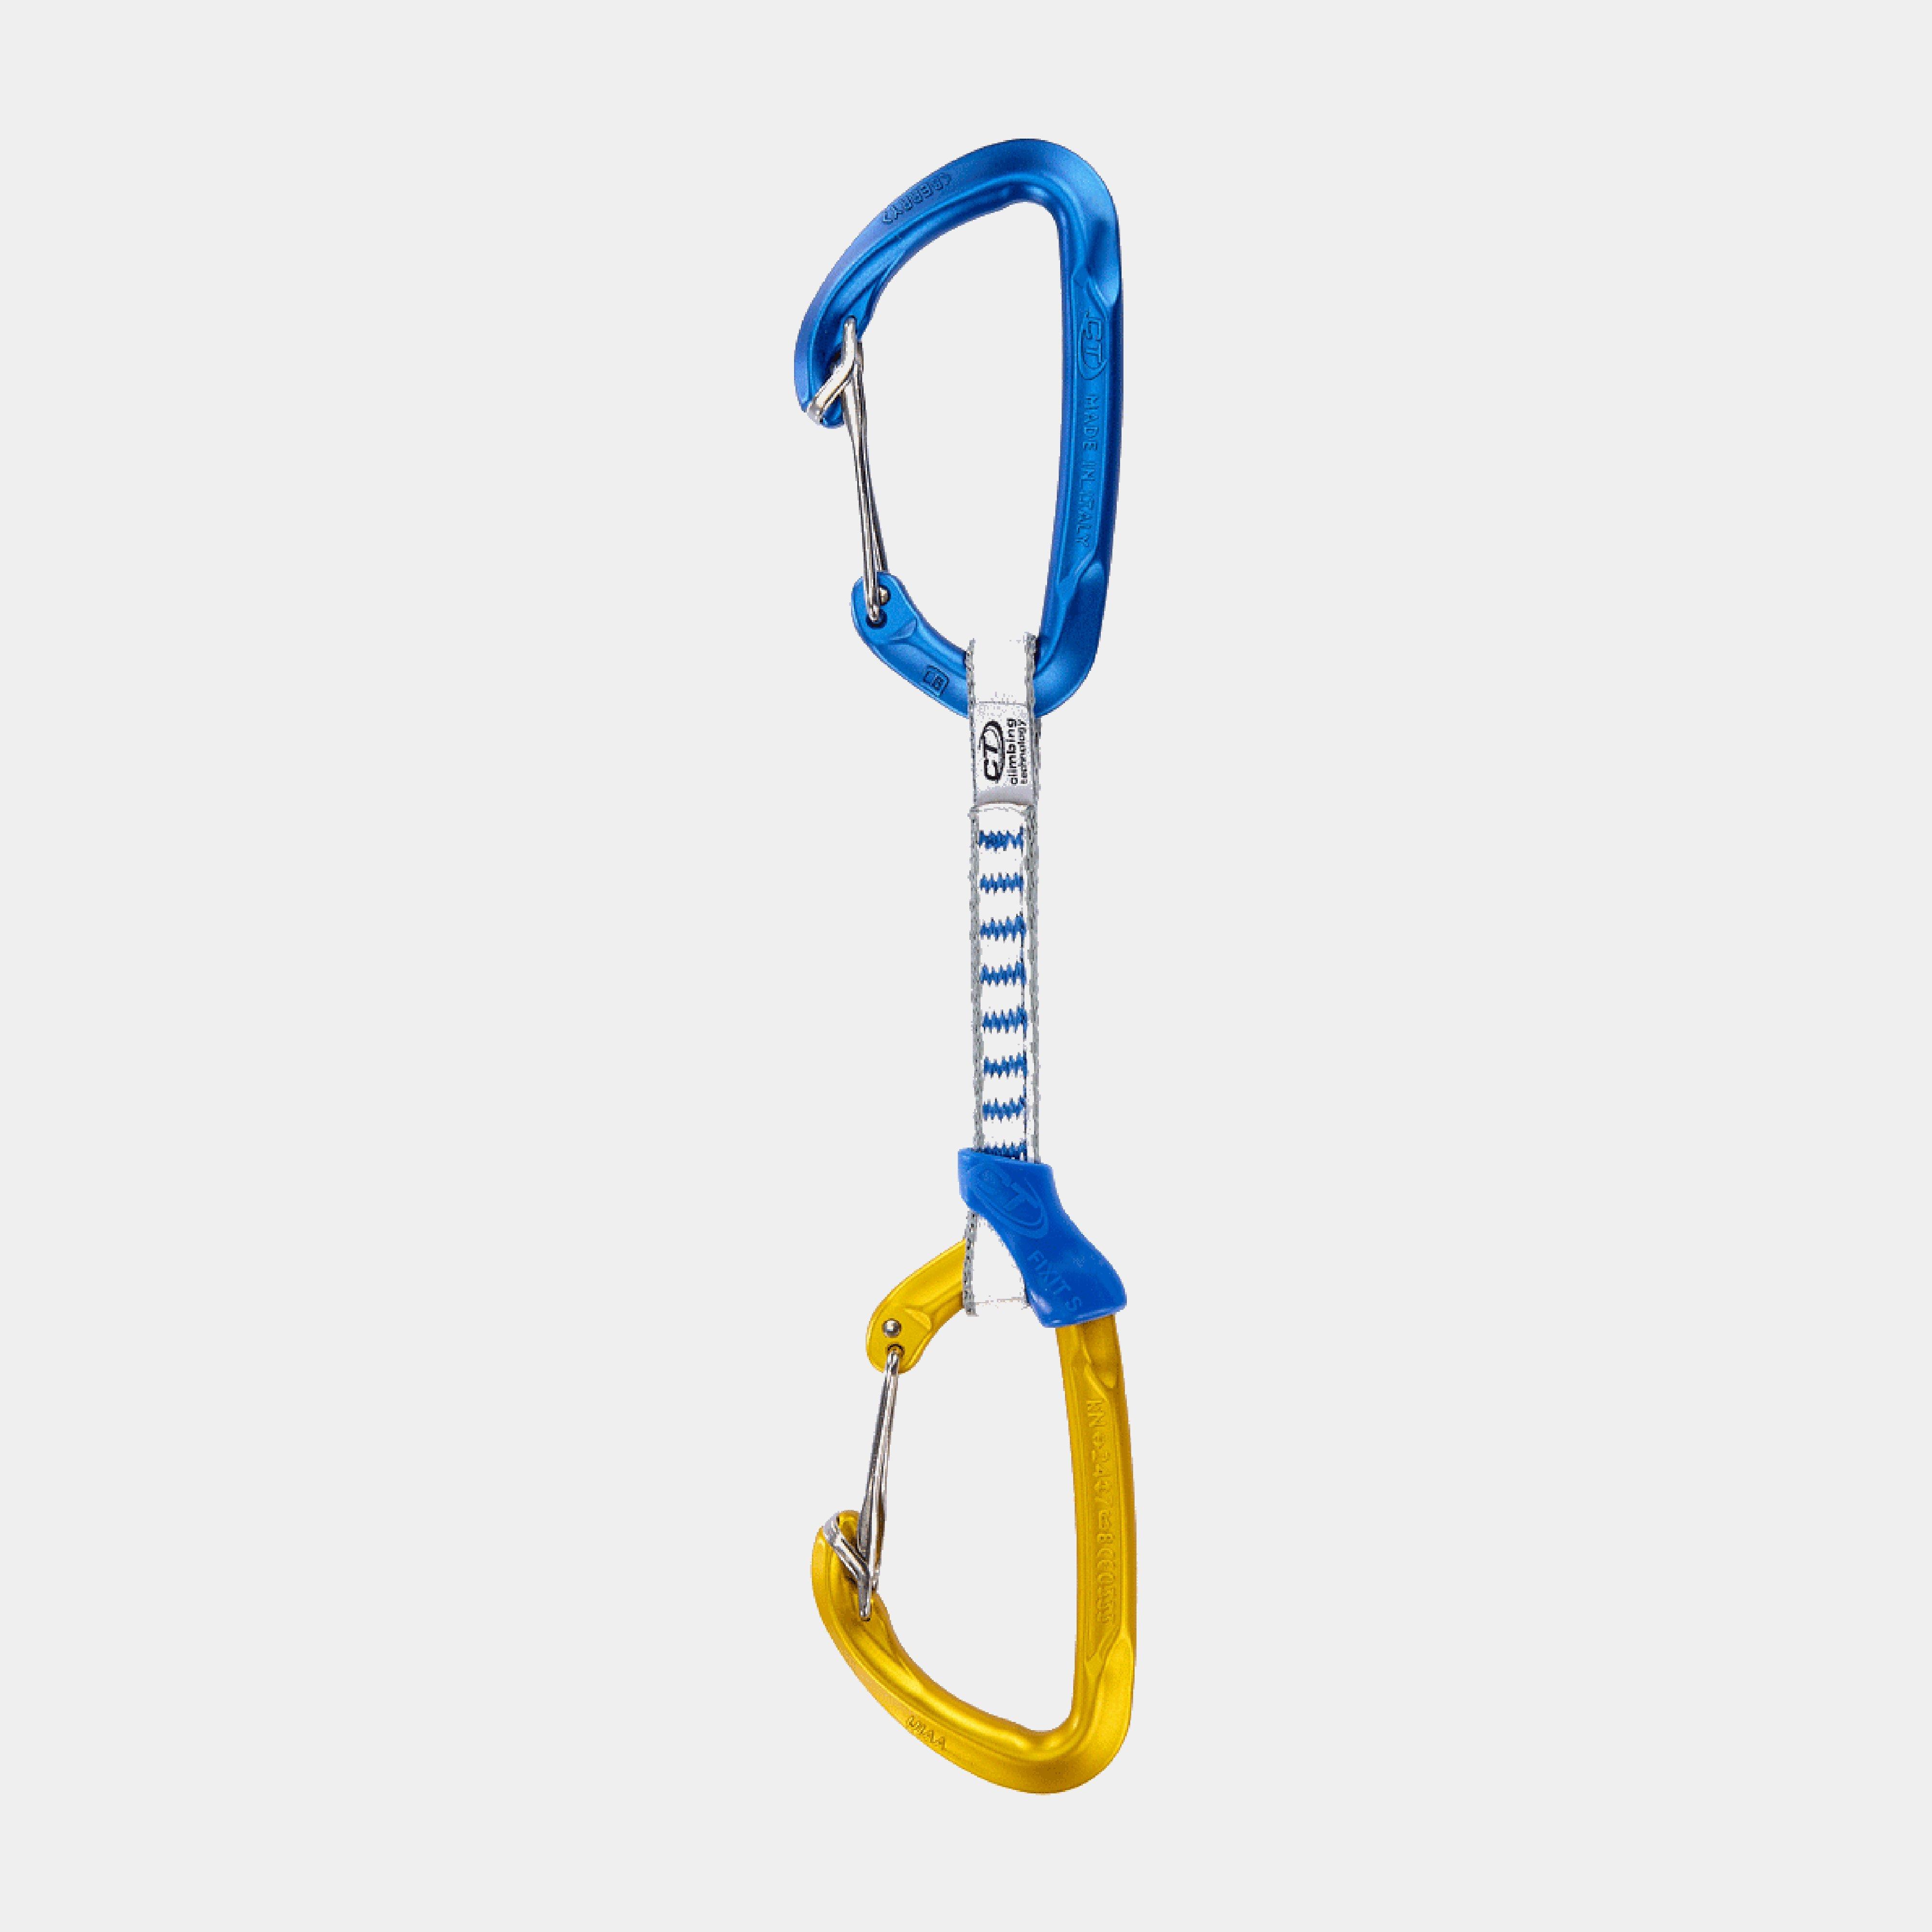  Climbing Technology Berry 12cm Quickdraw 6 Pack, Blue